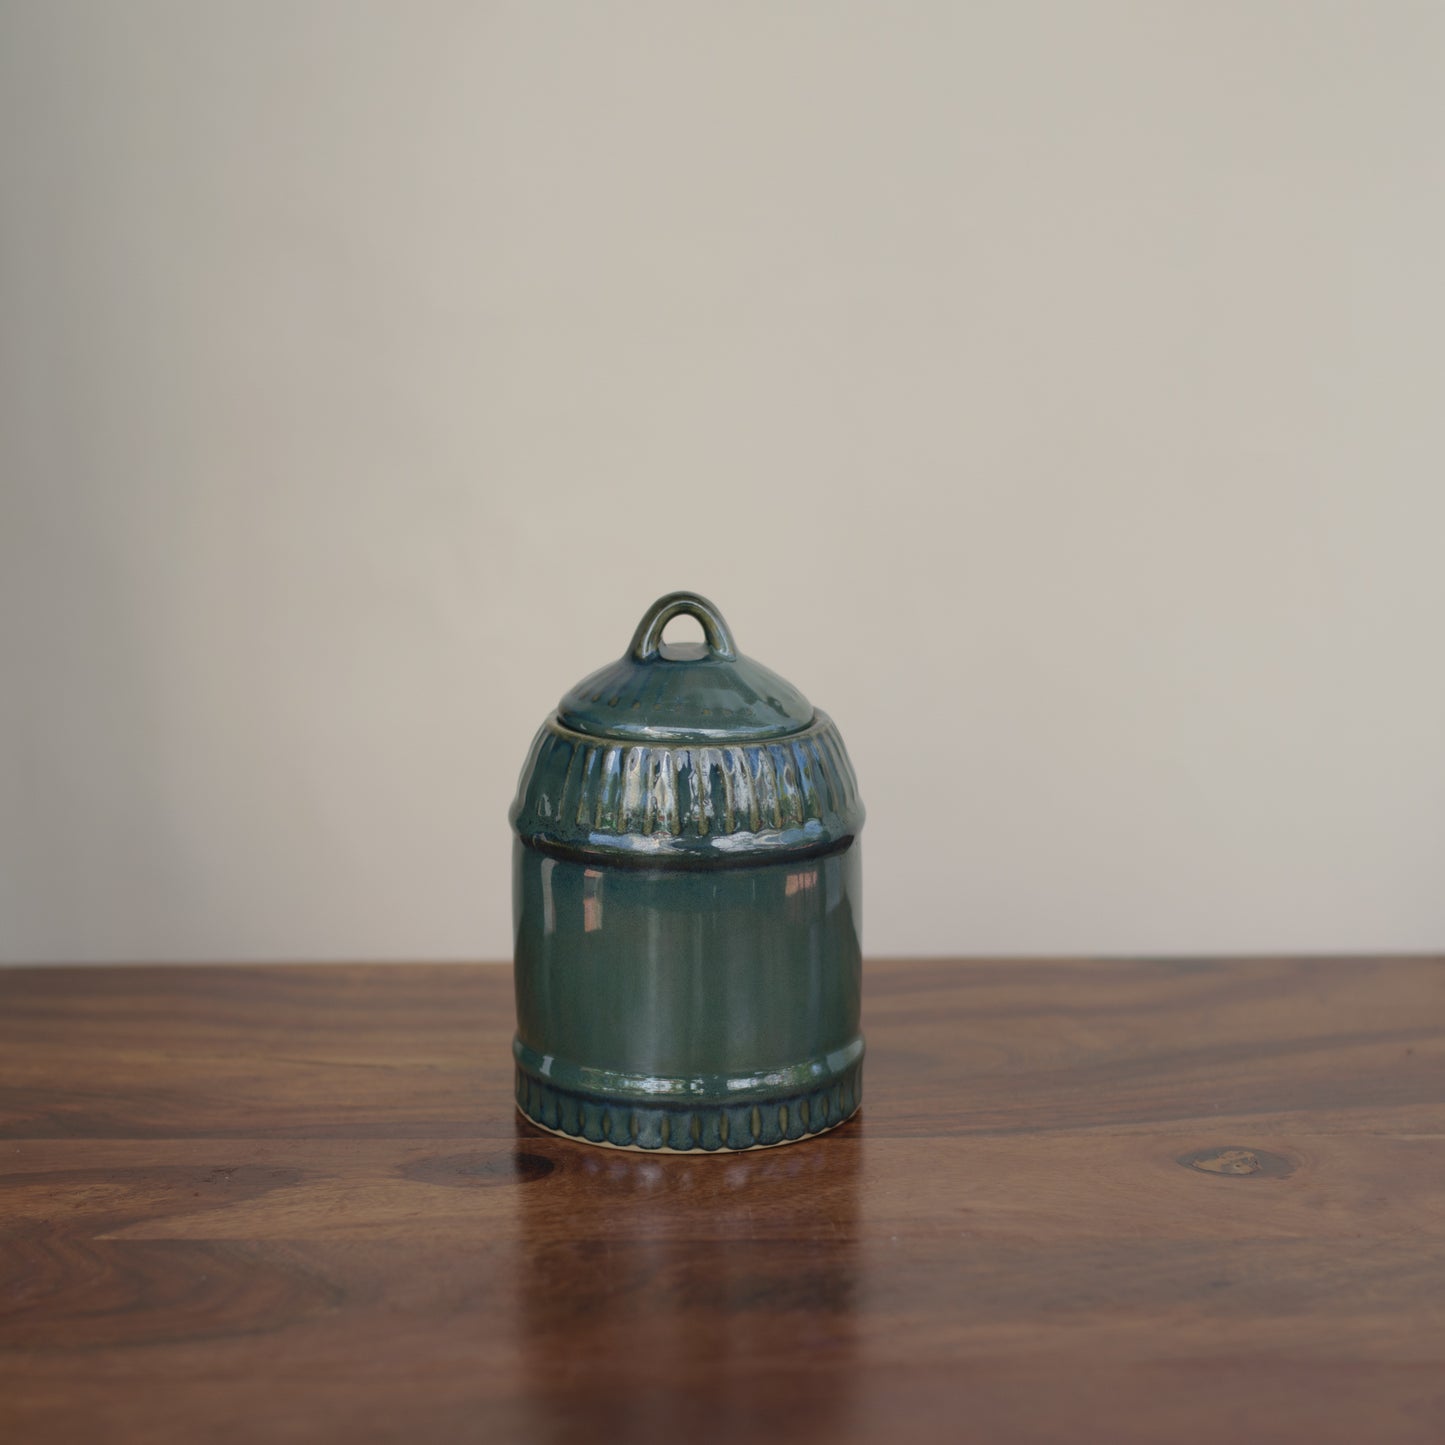 Medium ceramic jar in green glaze with dome-like lid, loop handle, tonal self-design placed on wooden table. Shop traditional Indian ceramics.